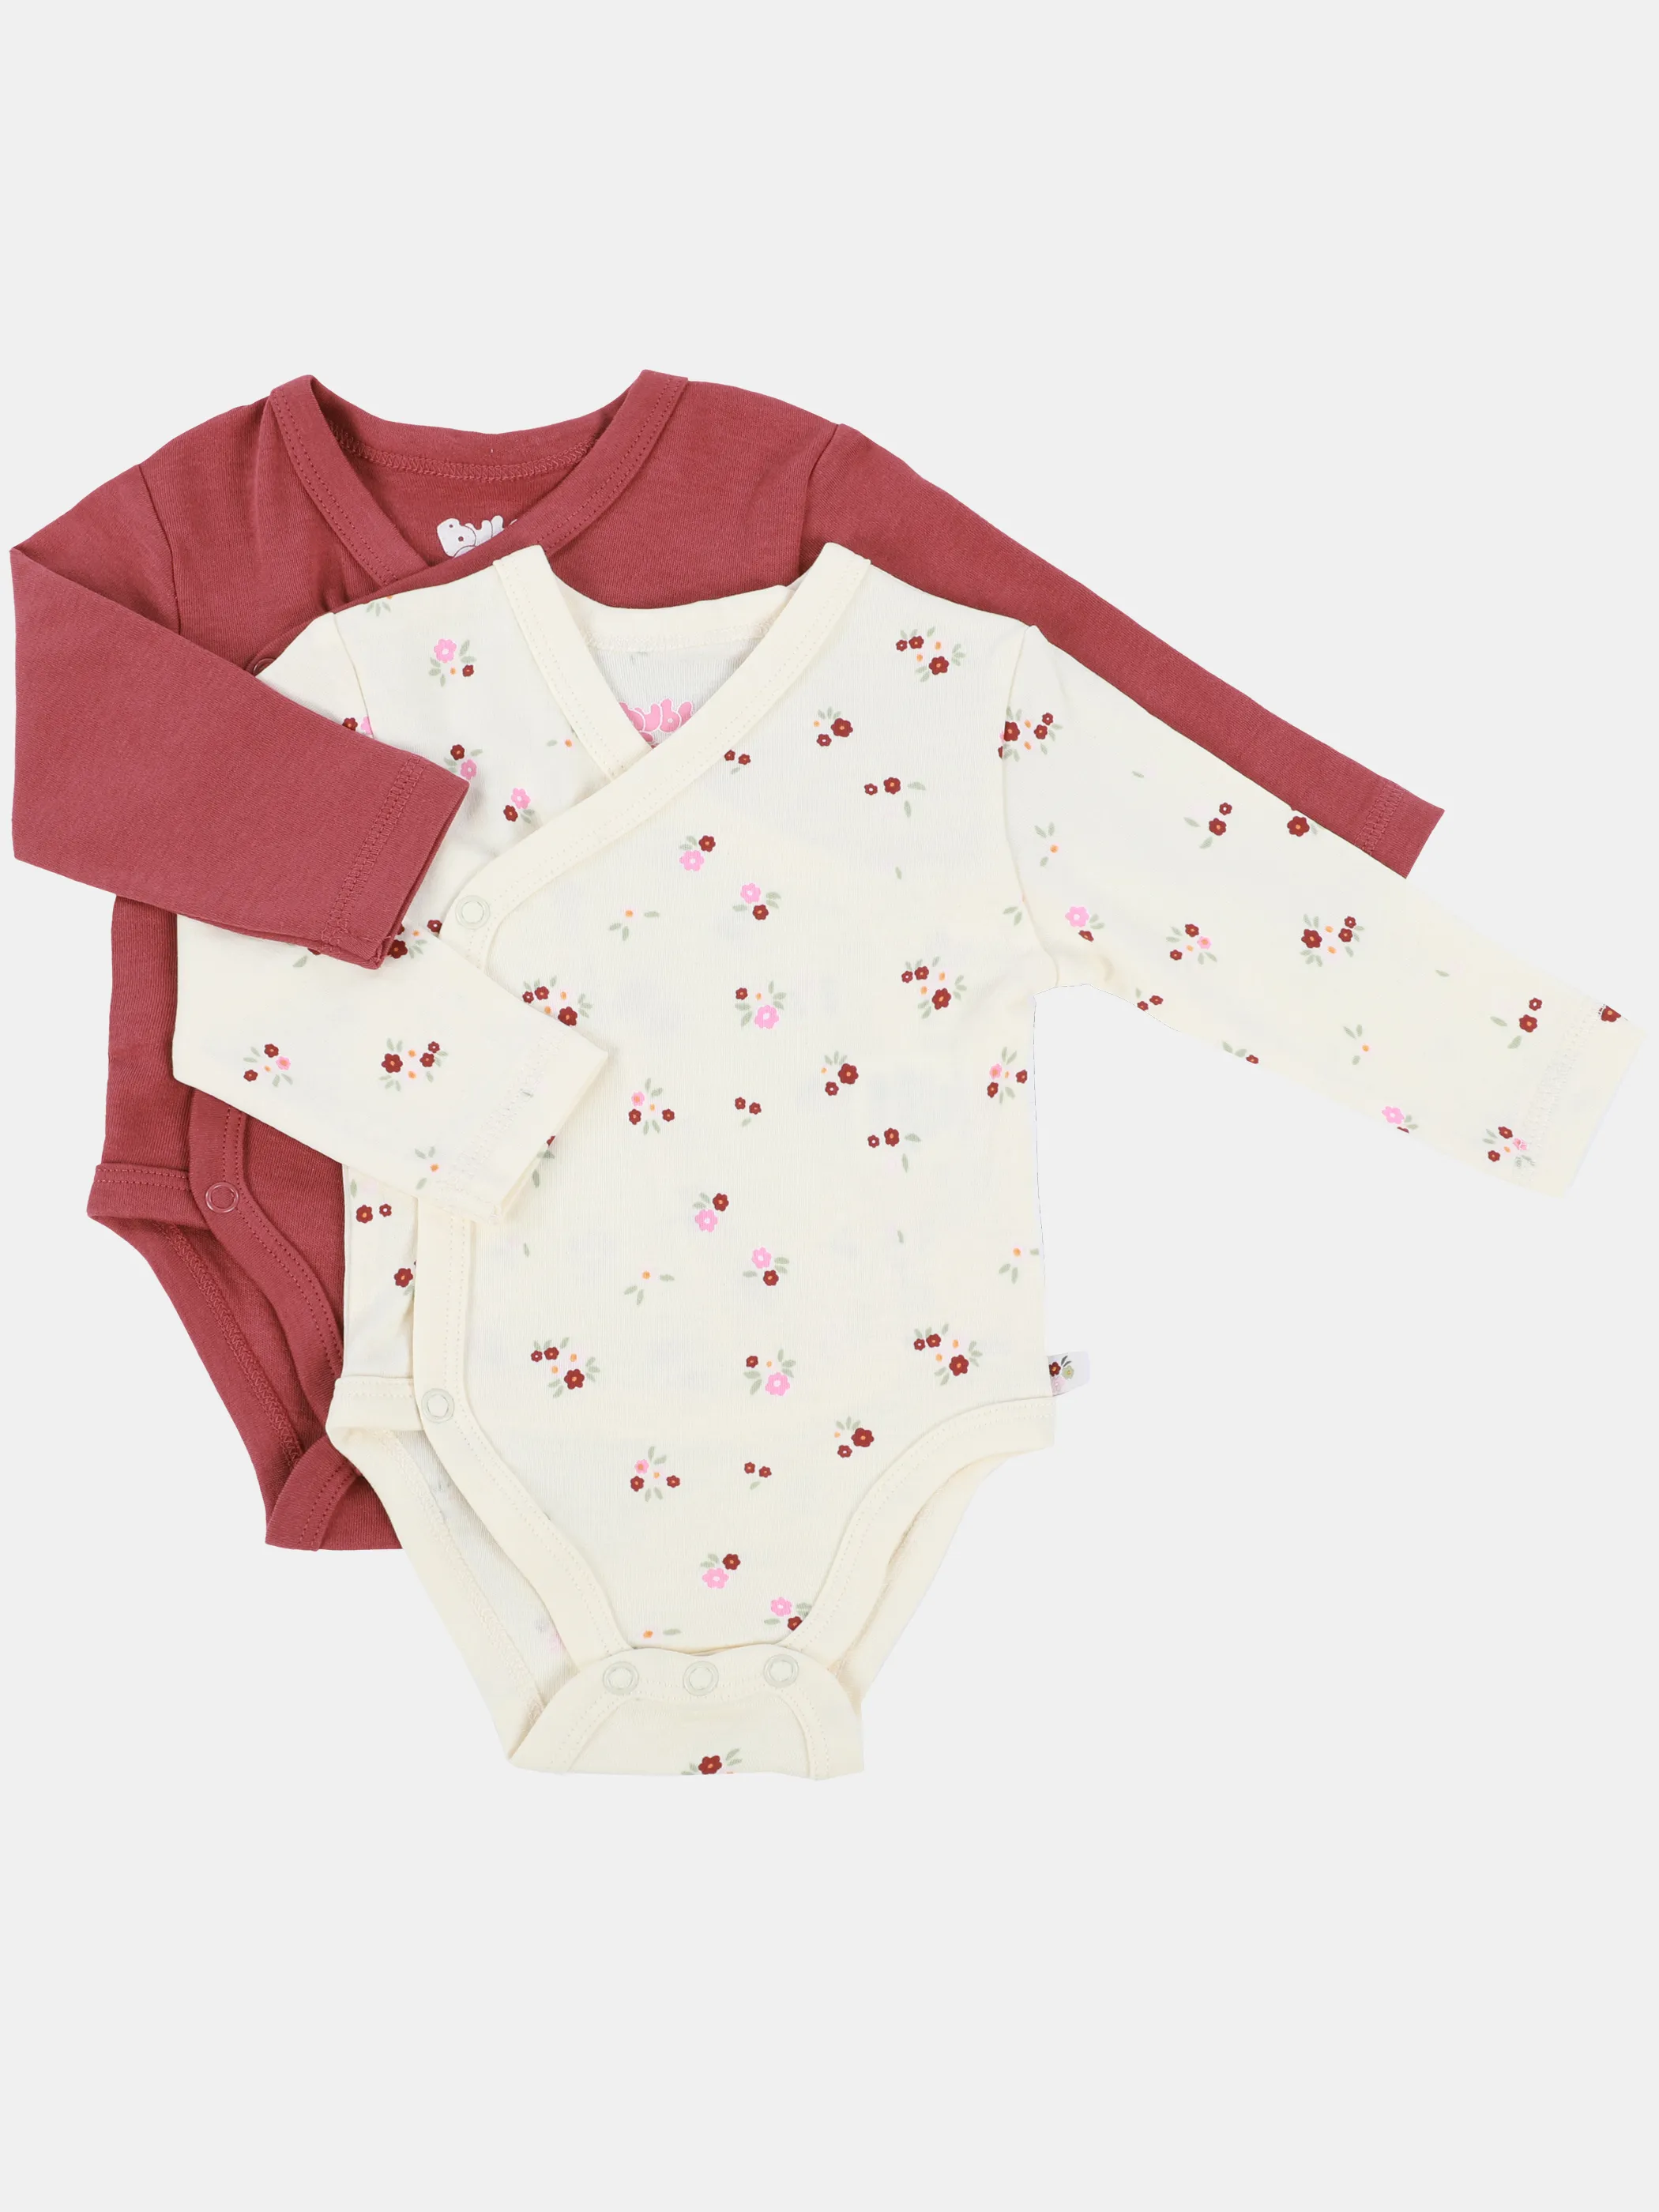 Bubble Gum Baby Mädchen 2er Pack Wickelbodys in rot Rot 898705 ROT 1